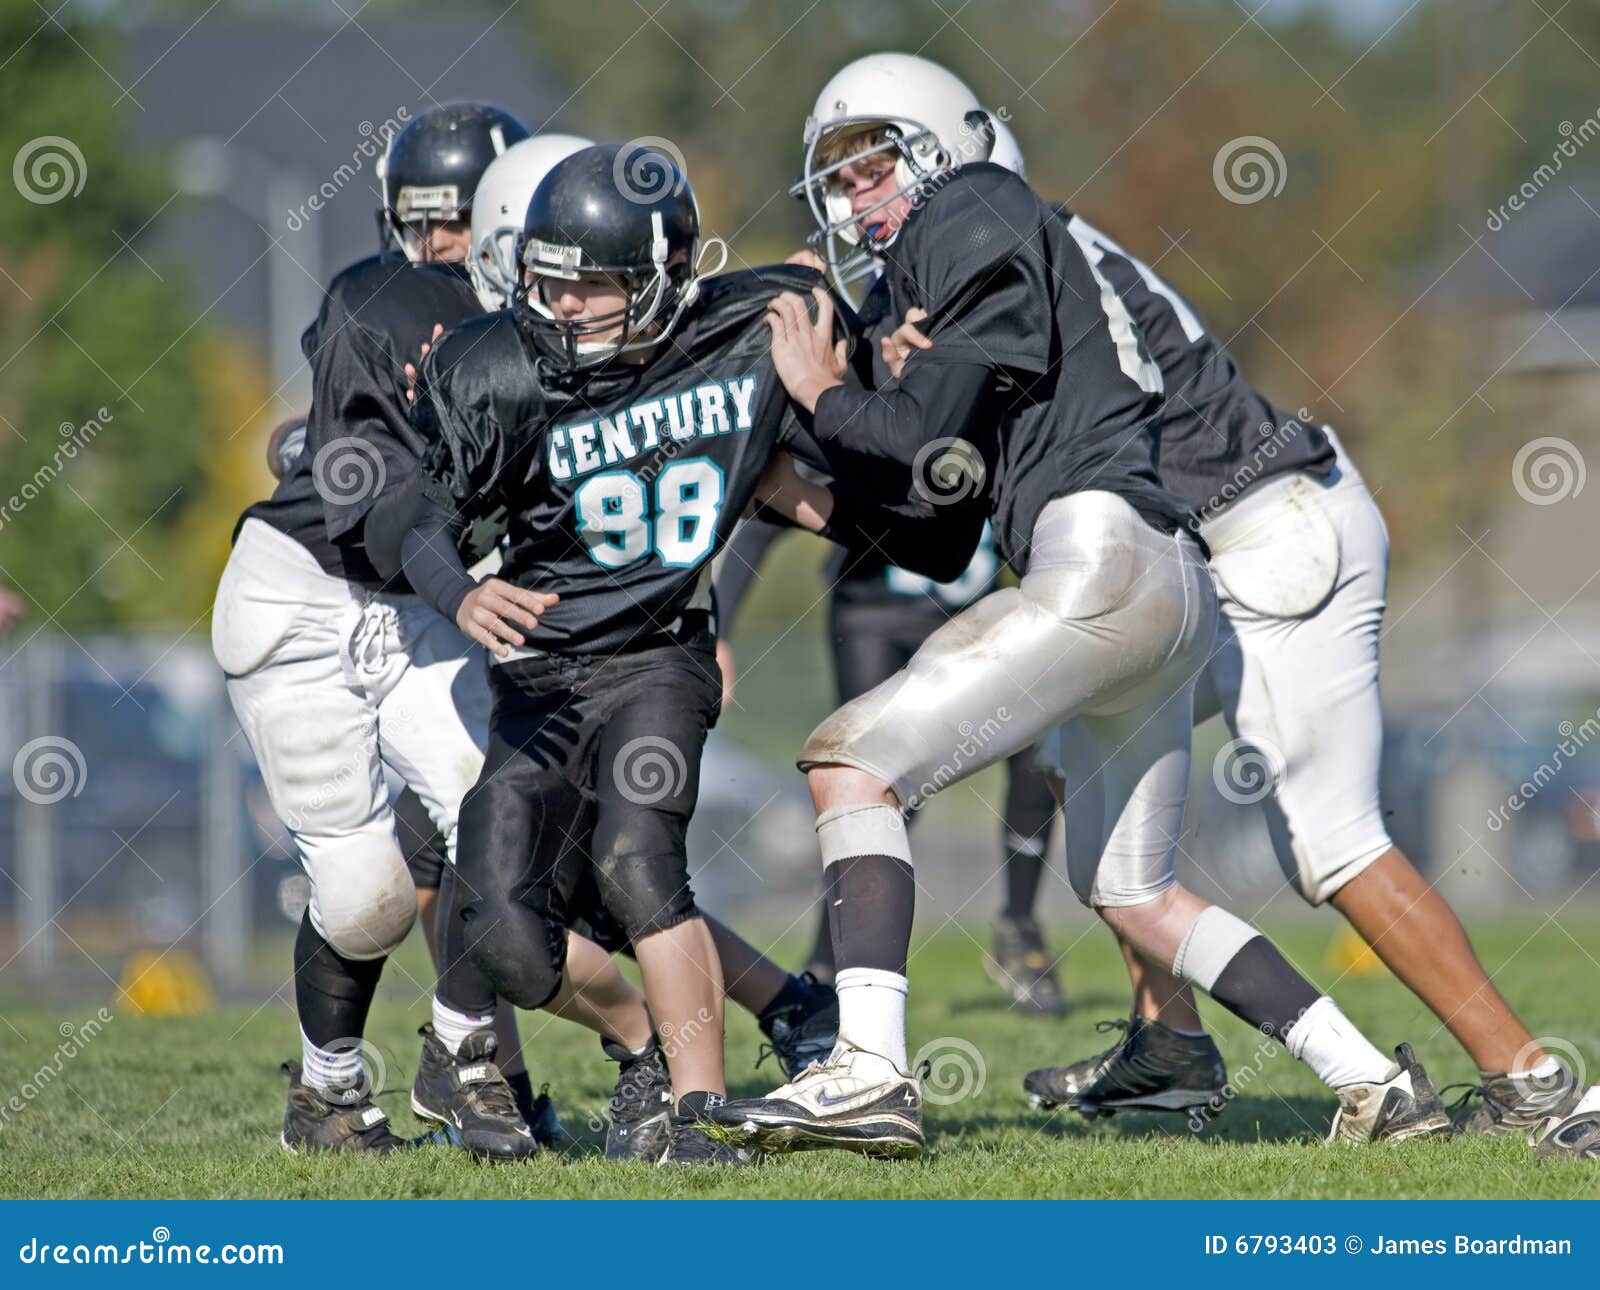 American Football youth 01 editorial stock photo. Image of education